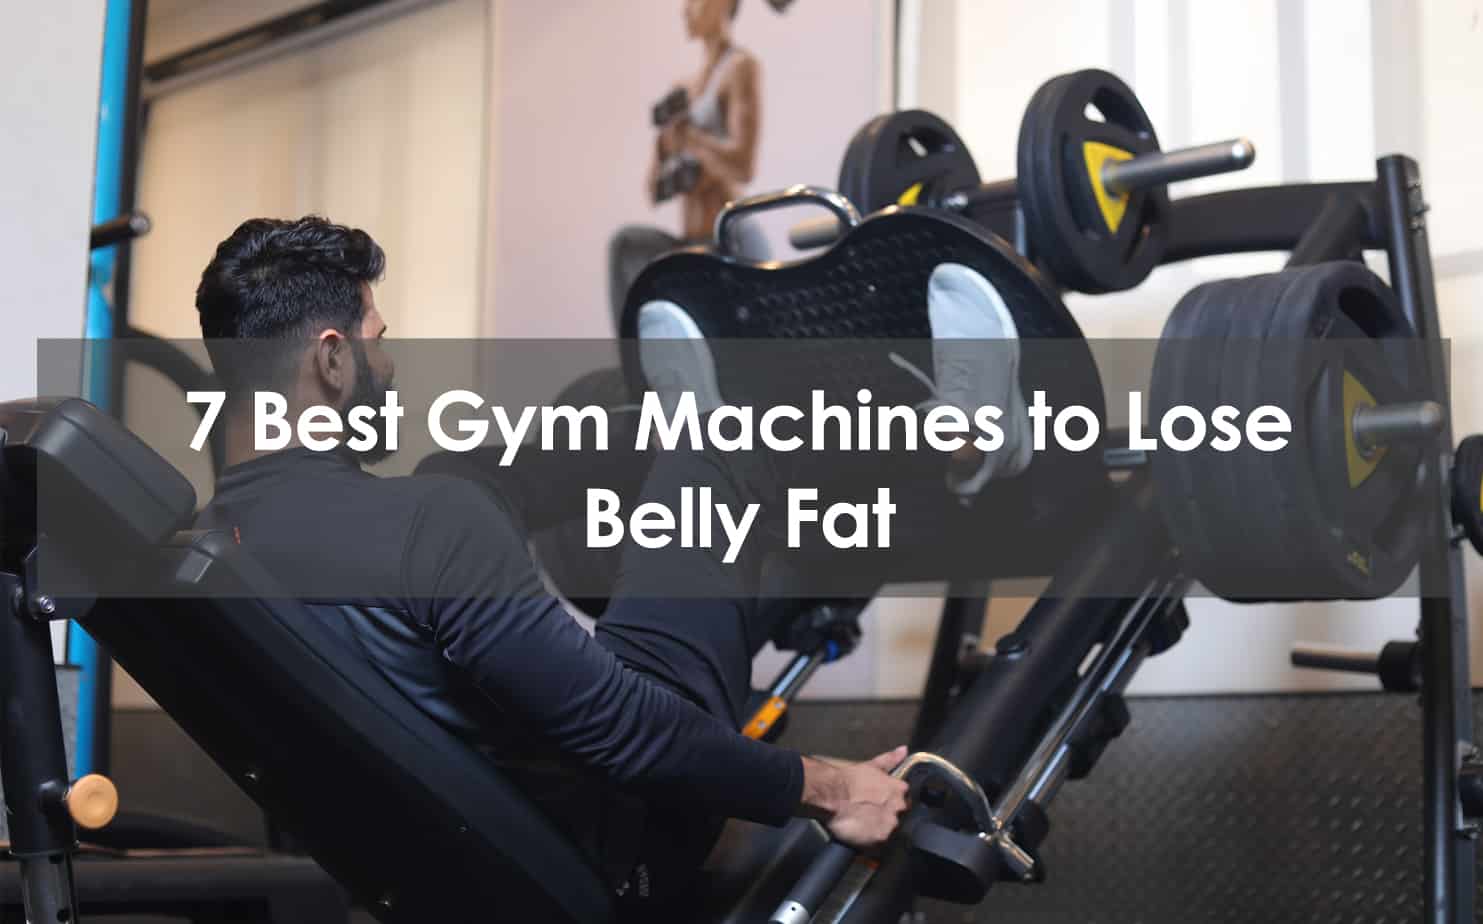 How to Lose Weight at the Gym – Best Gym Machines for Weight Loss